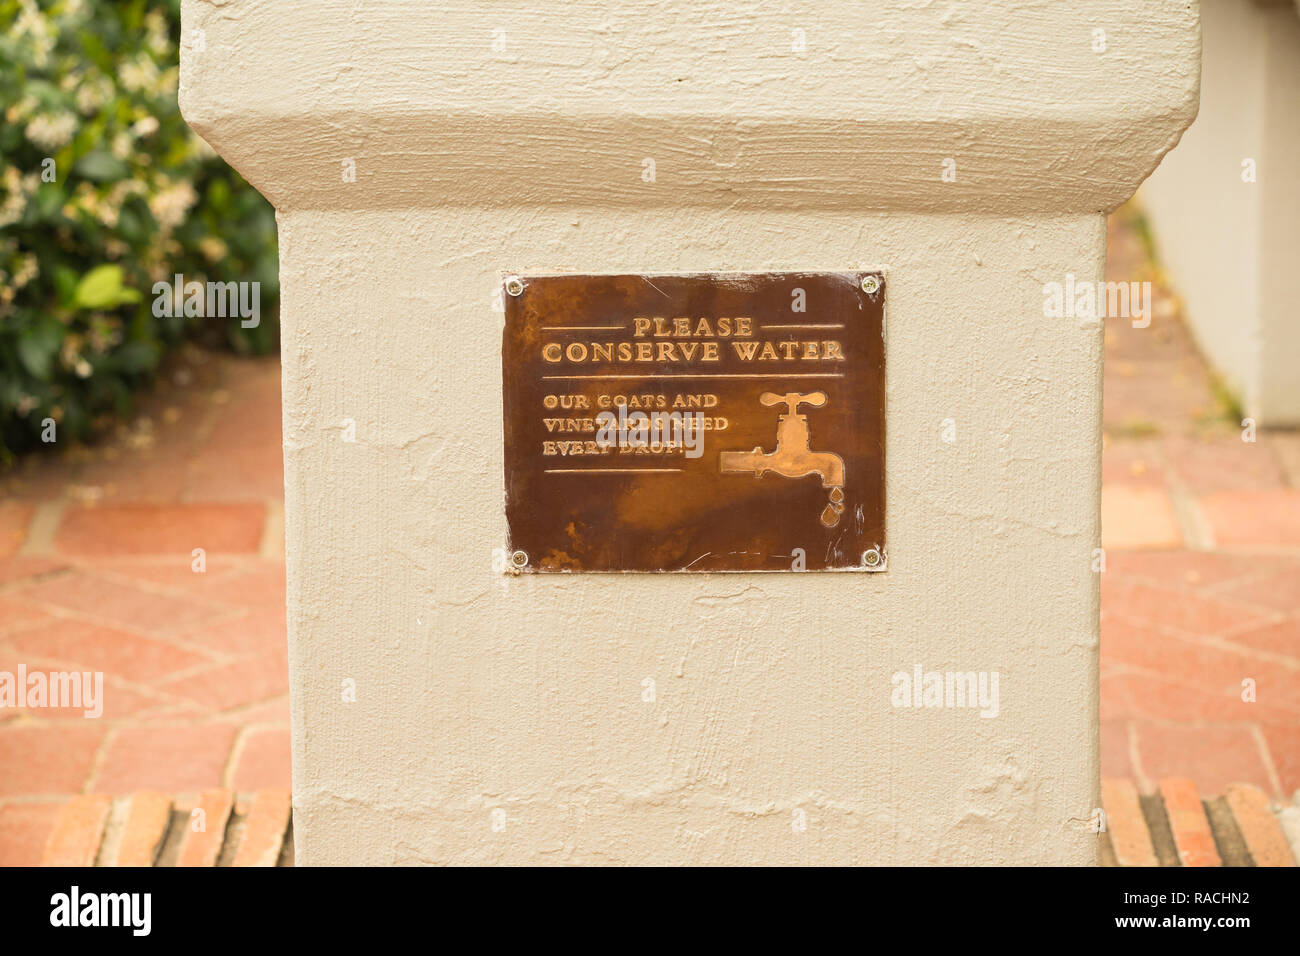 water conservation message written on copper plaque on wall in garden environmental friendly message for water scarcity in Cape Town South Africa Stock Photo